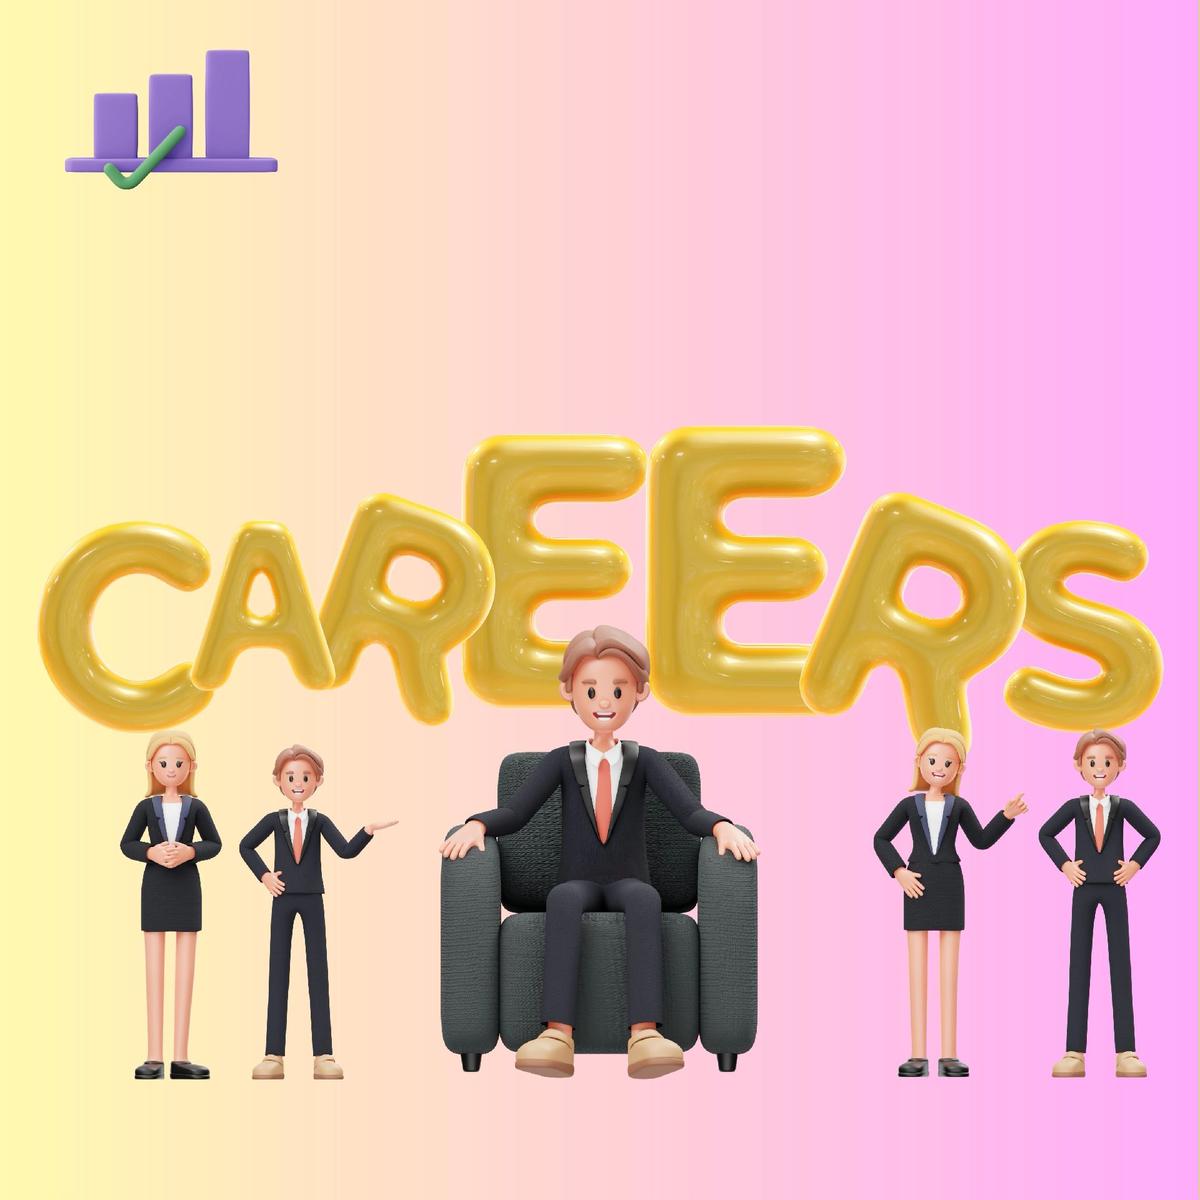 Careers's images